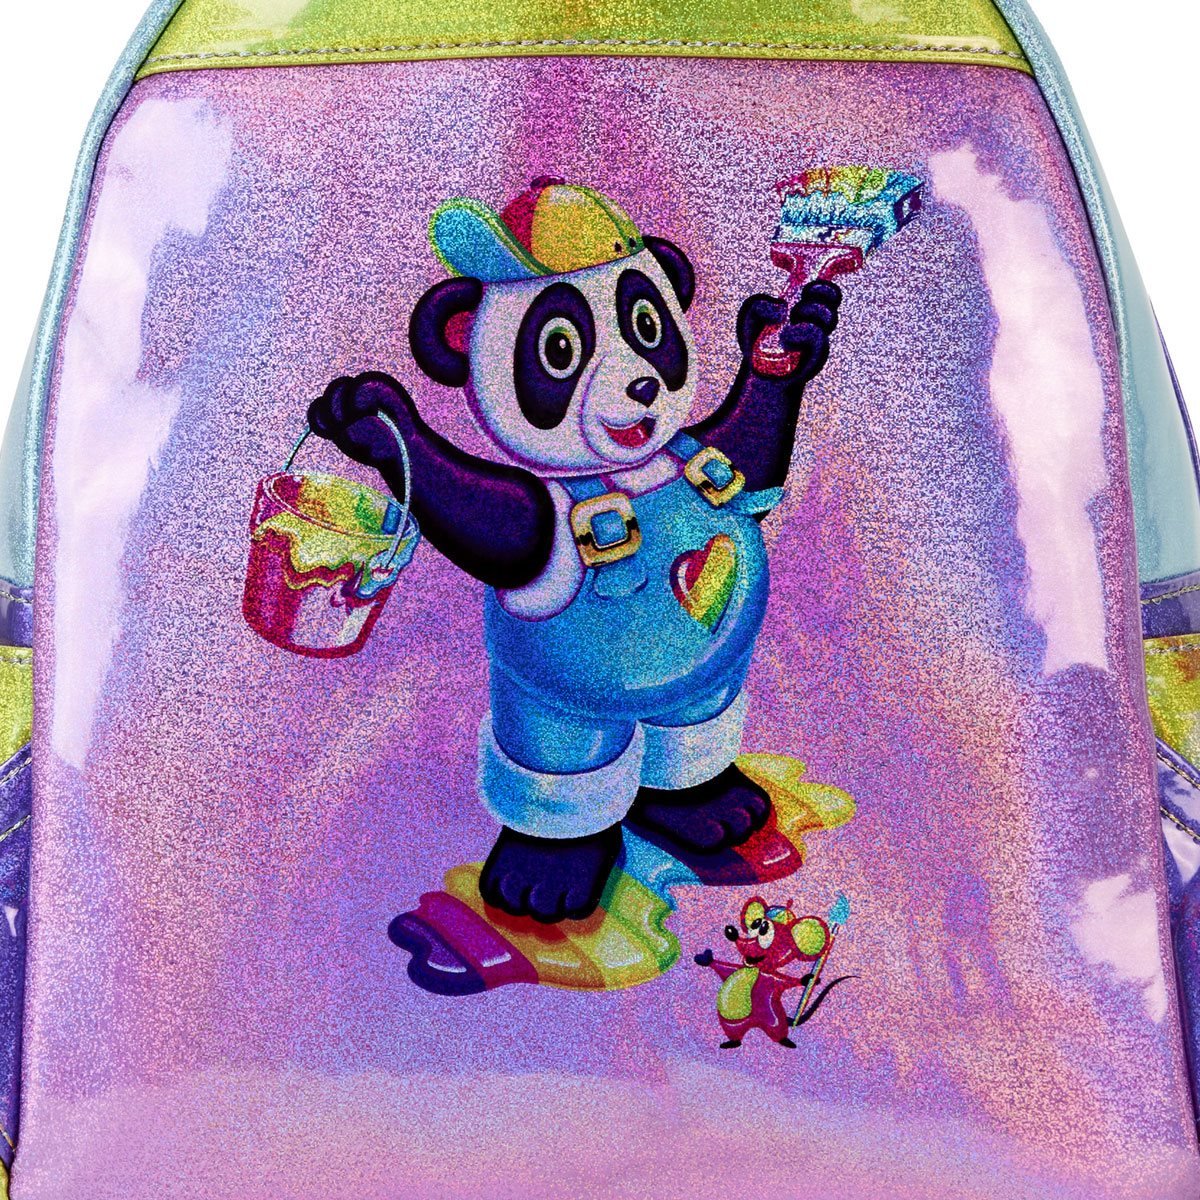 2 new Lisa frank bags to add to my collection The rainbow heart